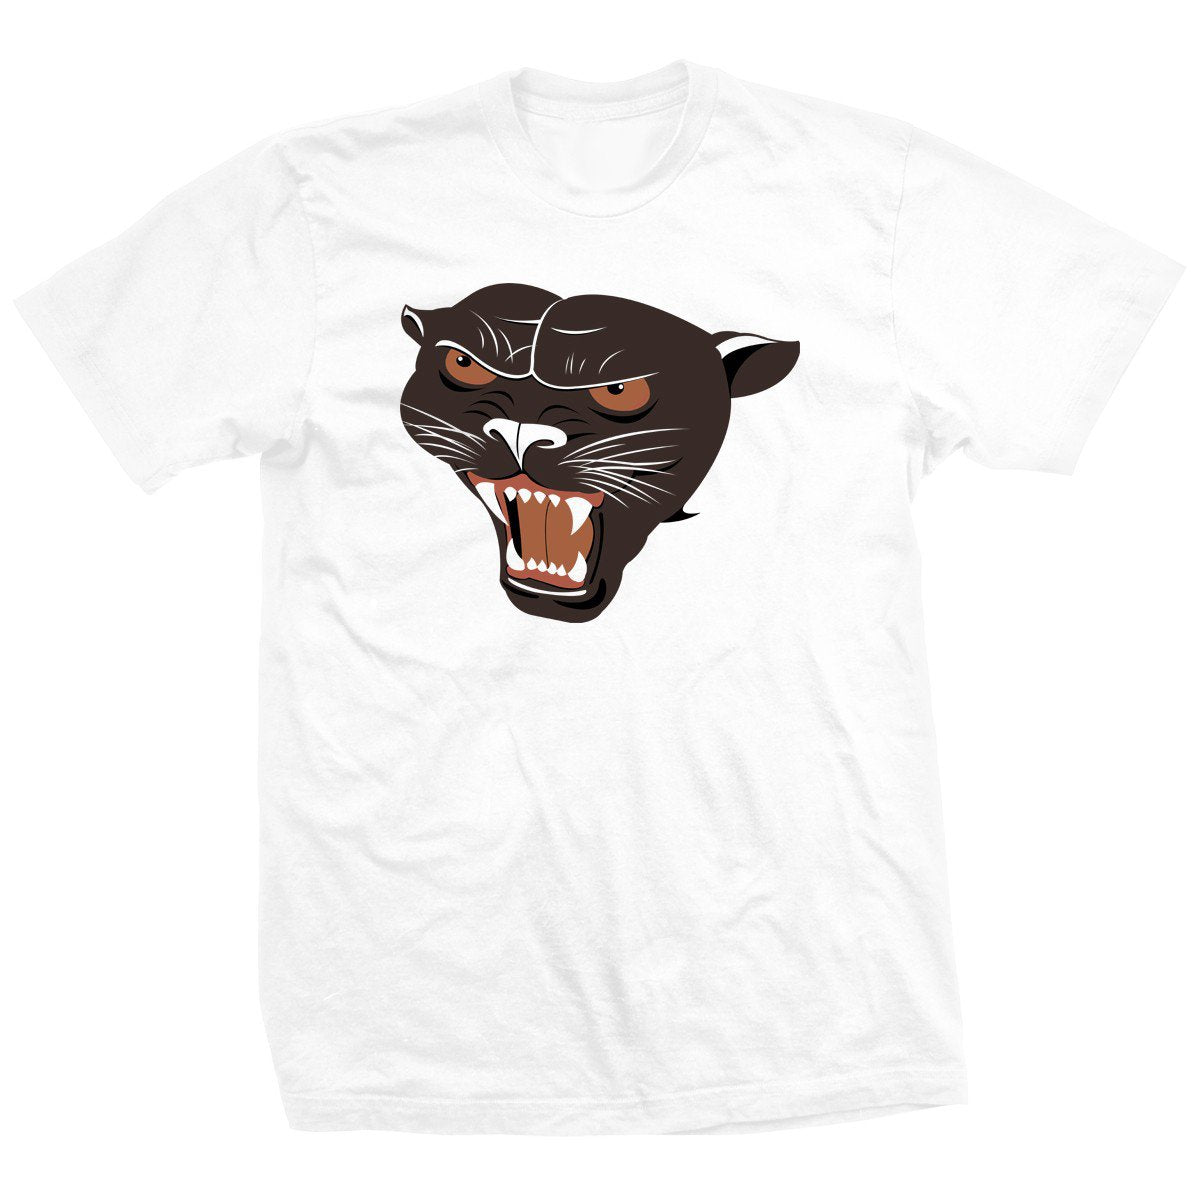 Roddy Piper A Rowdy Panther T-Shirt